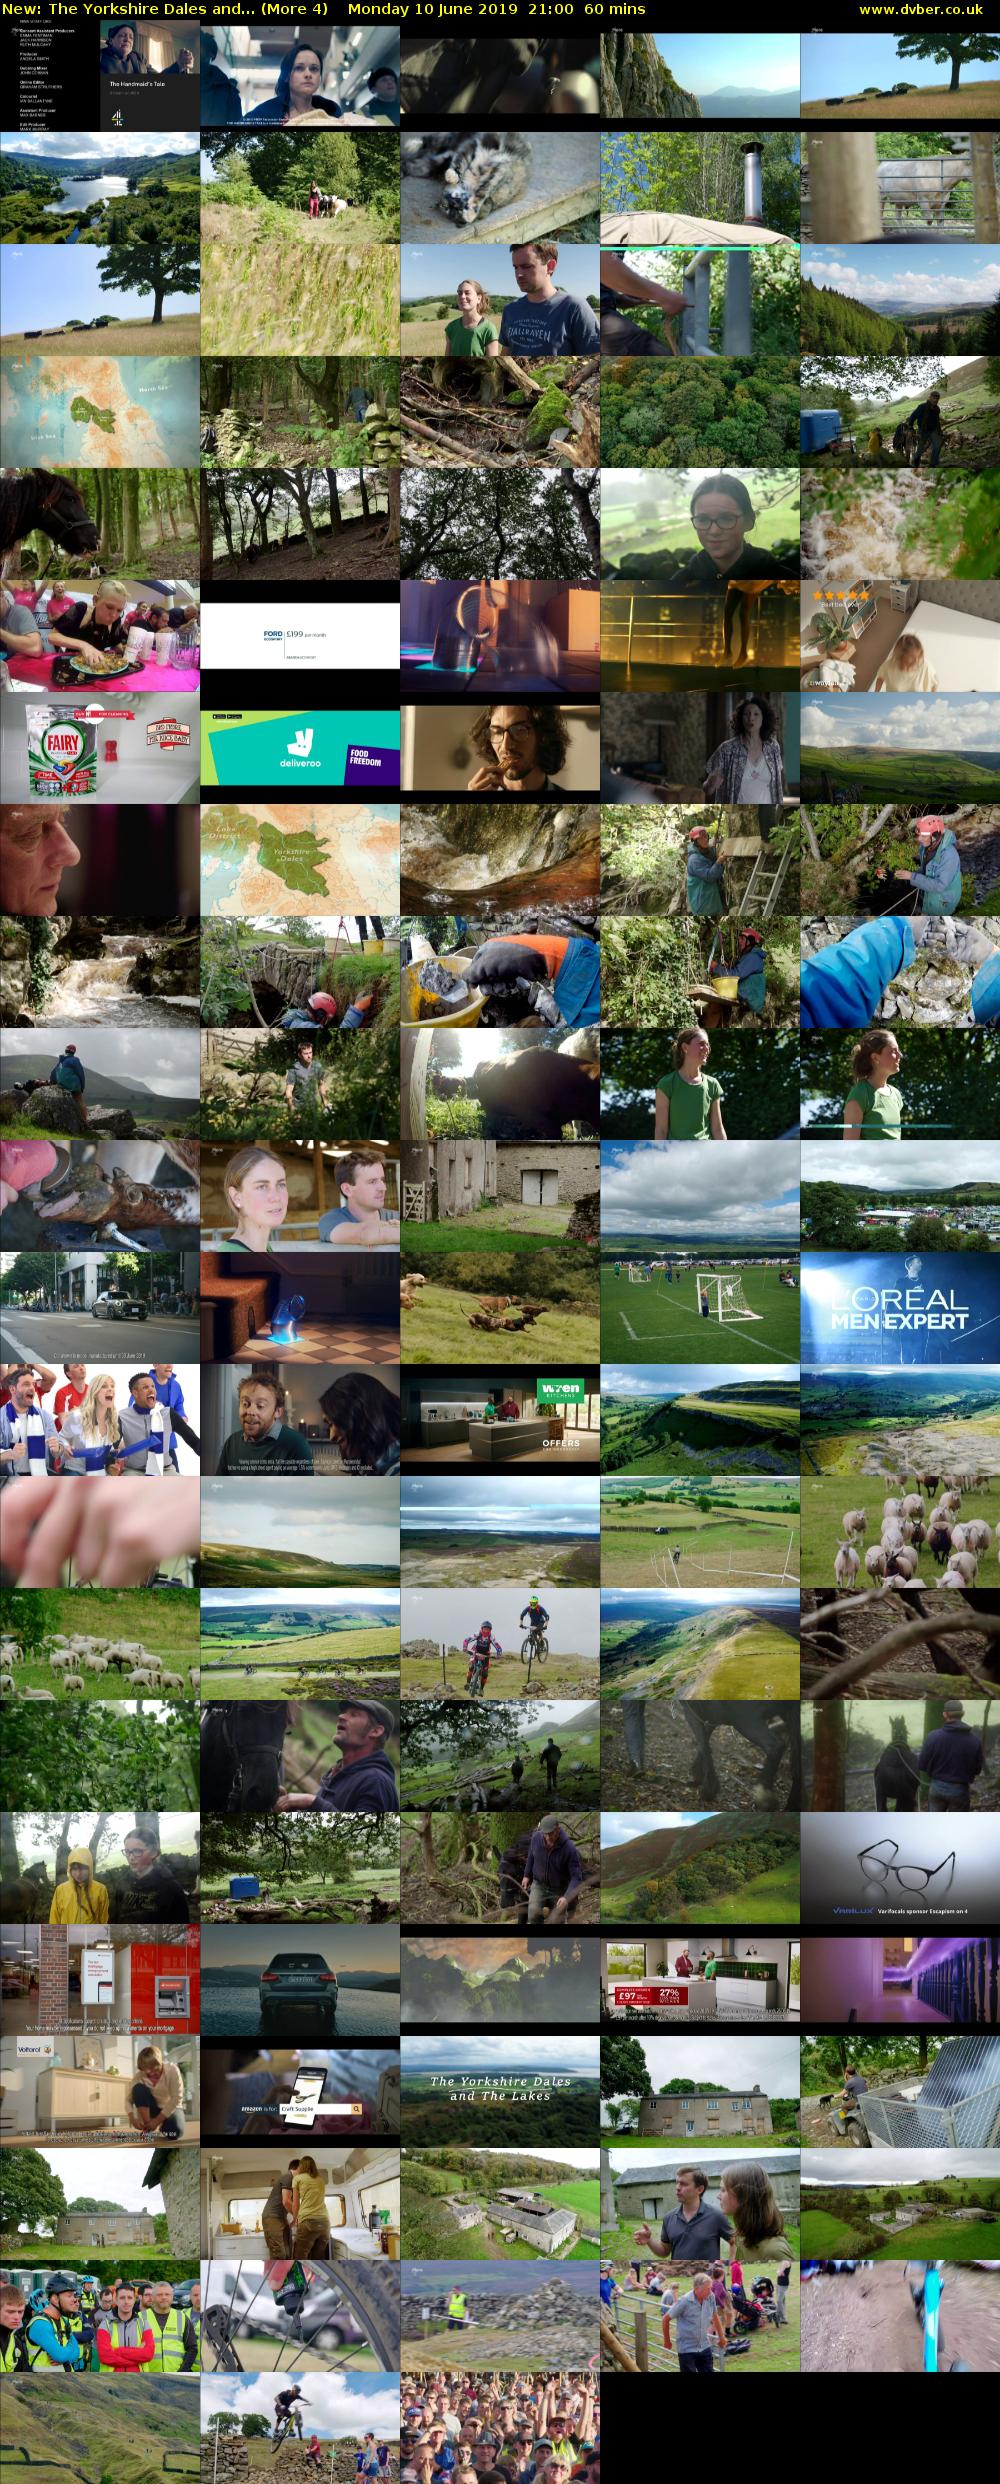 The Yorkshire Dales and... (More 4) Monday 10 June 2019 21:00 - 22:00